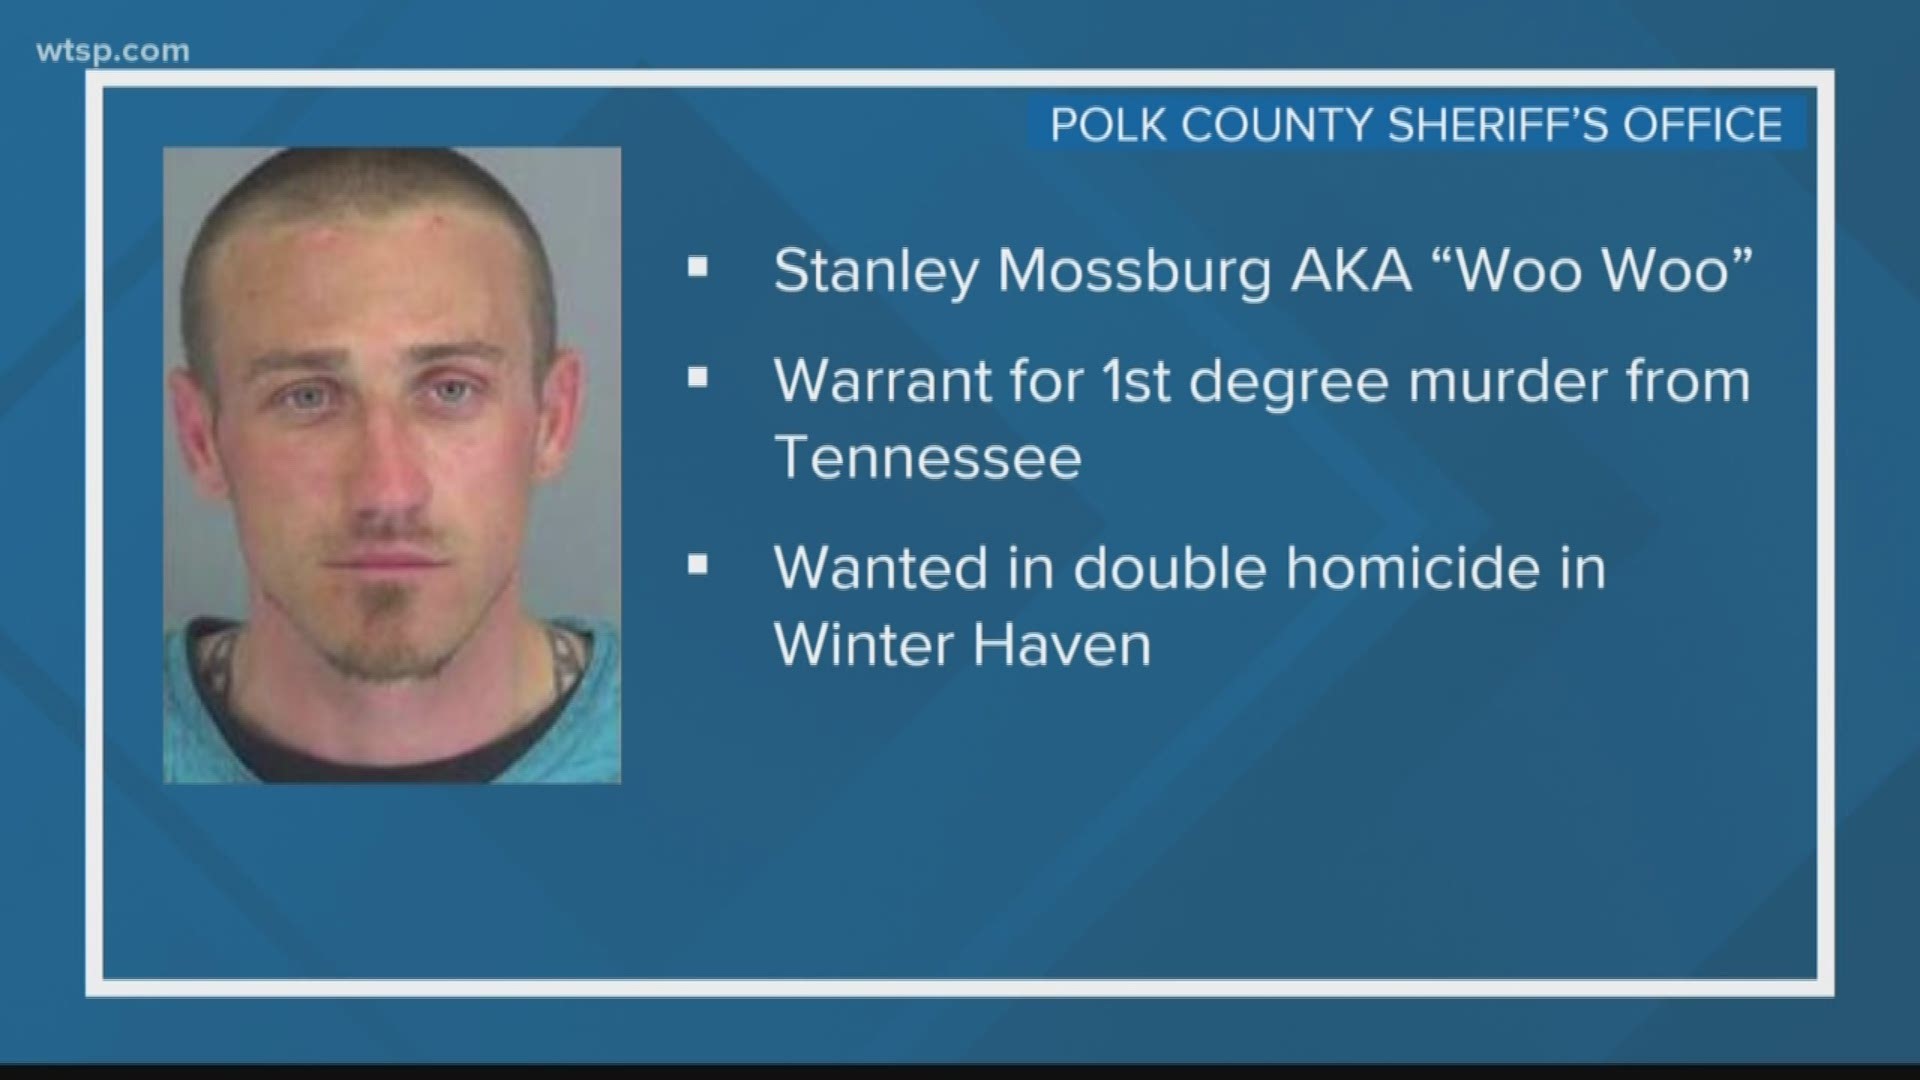 Stanley Eric Mossburg, 35, who also goes by the nickname "Woo Woo," last was seen driving a stolen 2013 black Hyundai Tuscon, the sheriff's office says.